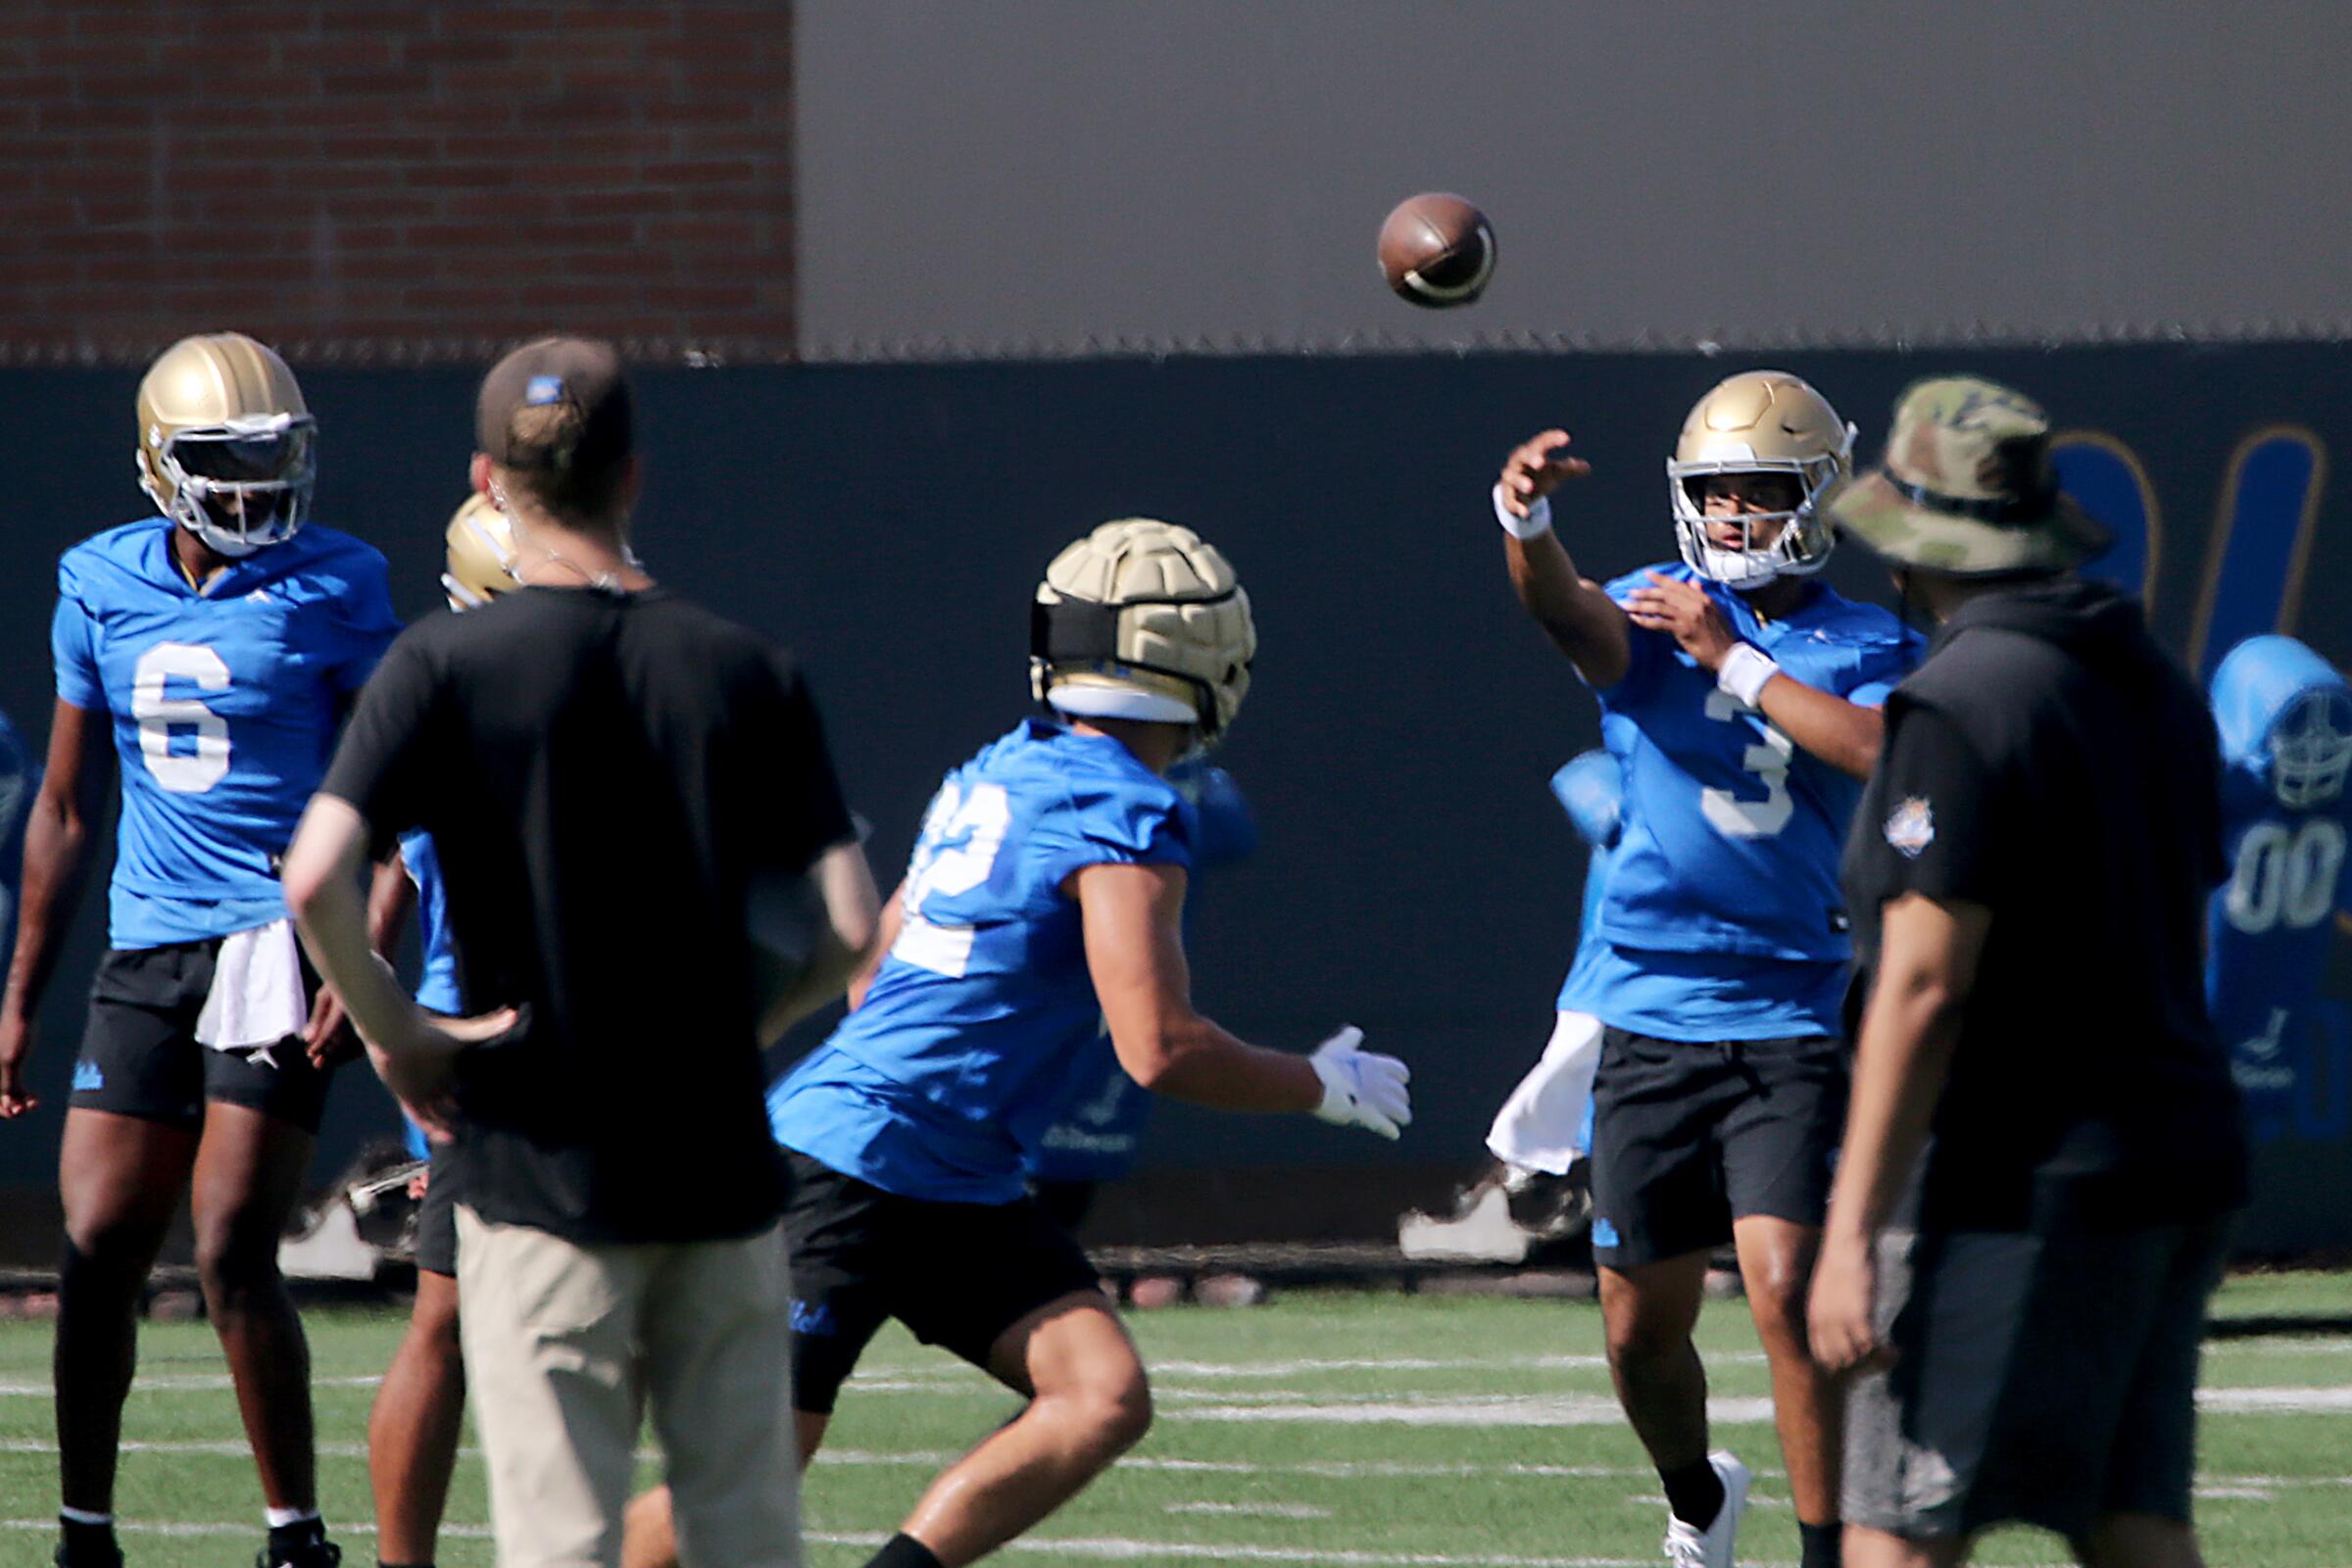 UCLA quarterback Dante Moore warms up during a practice session at Spaulding Field on the UCLA campus.